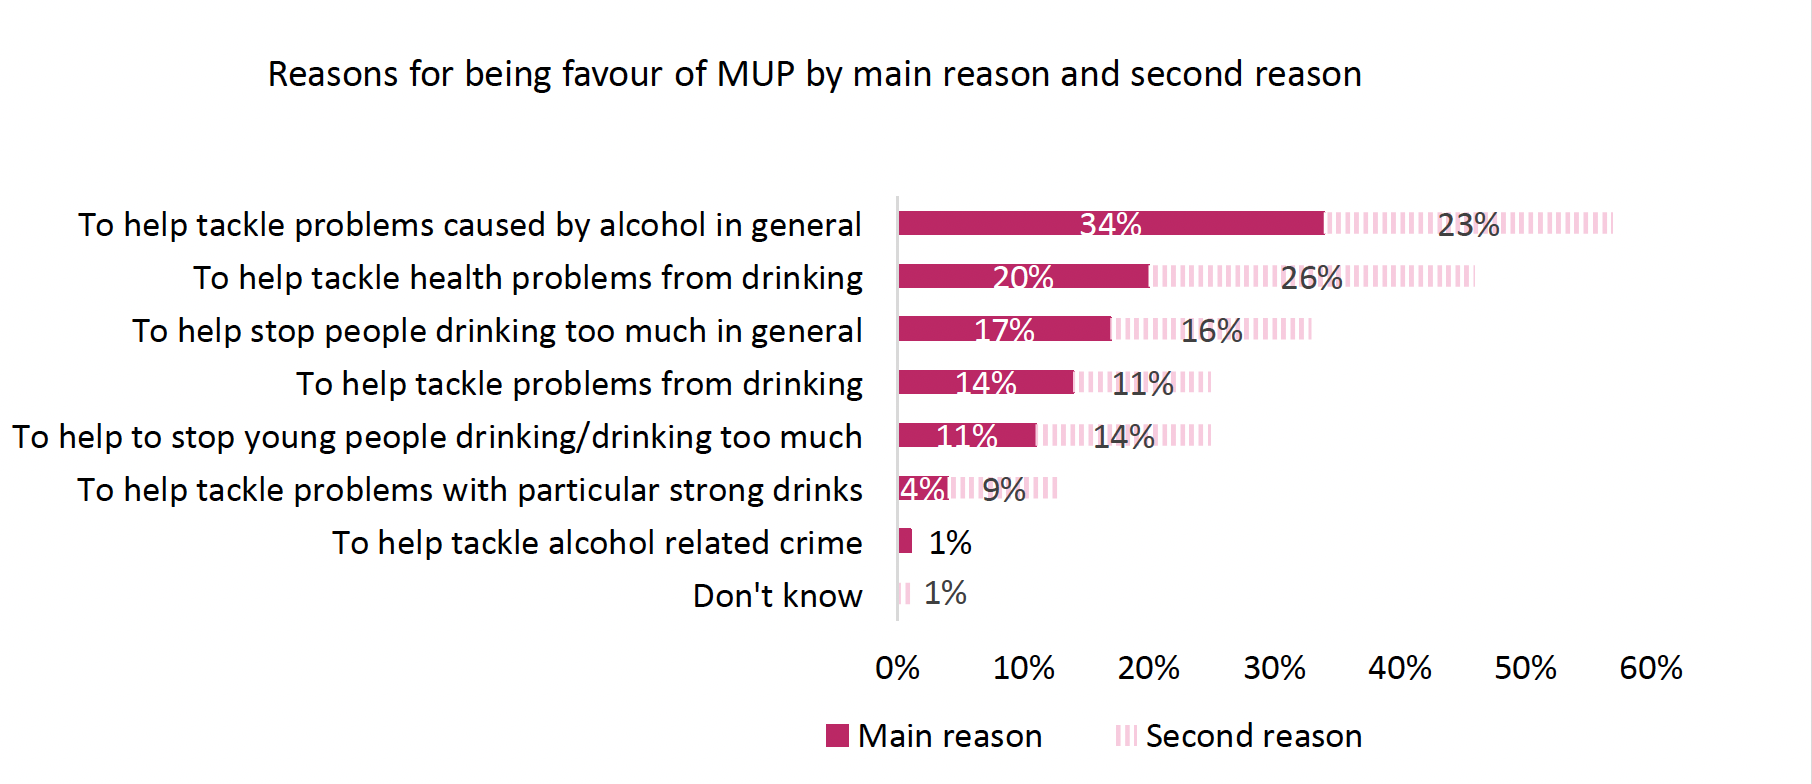 Stacked bar chart setting out the reasons given for being in favour of MUP by main and second reason. The most popular reason given overall and as a main reason is 'To help tackle problems caused by alcohol in general'. The most popular second reason is 'To help tackle health problems from drinking'.